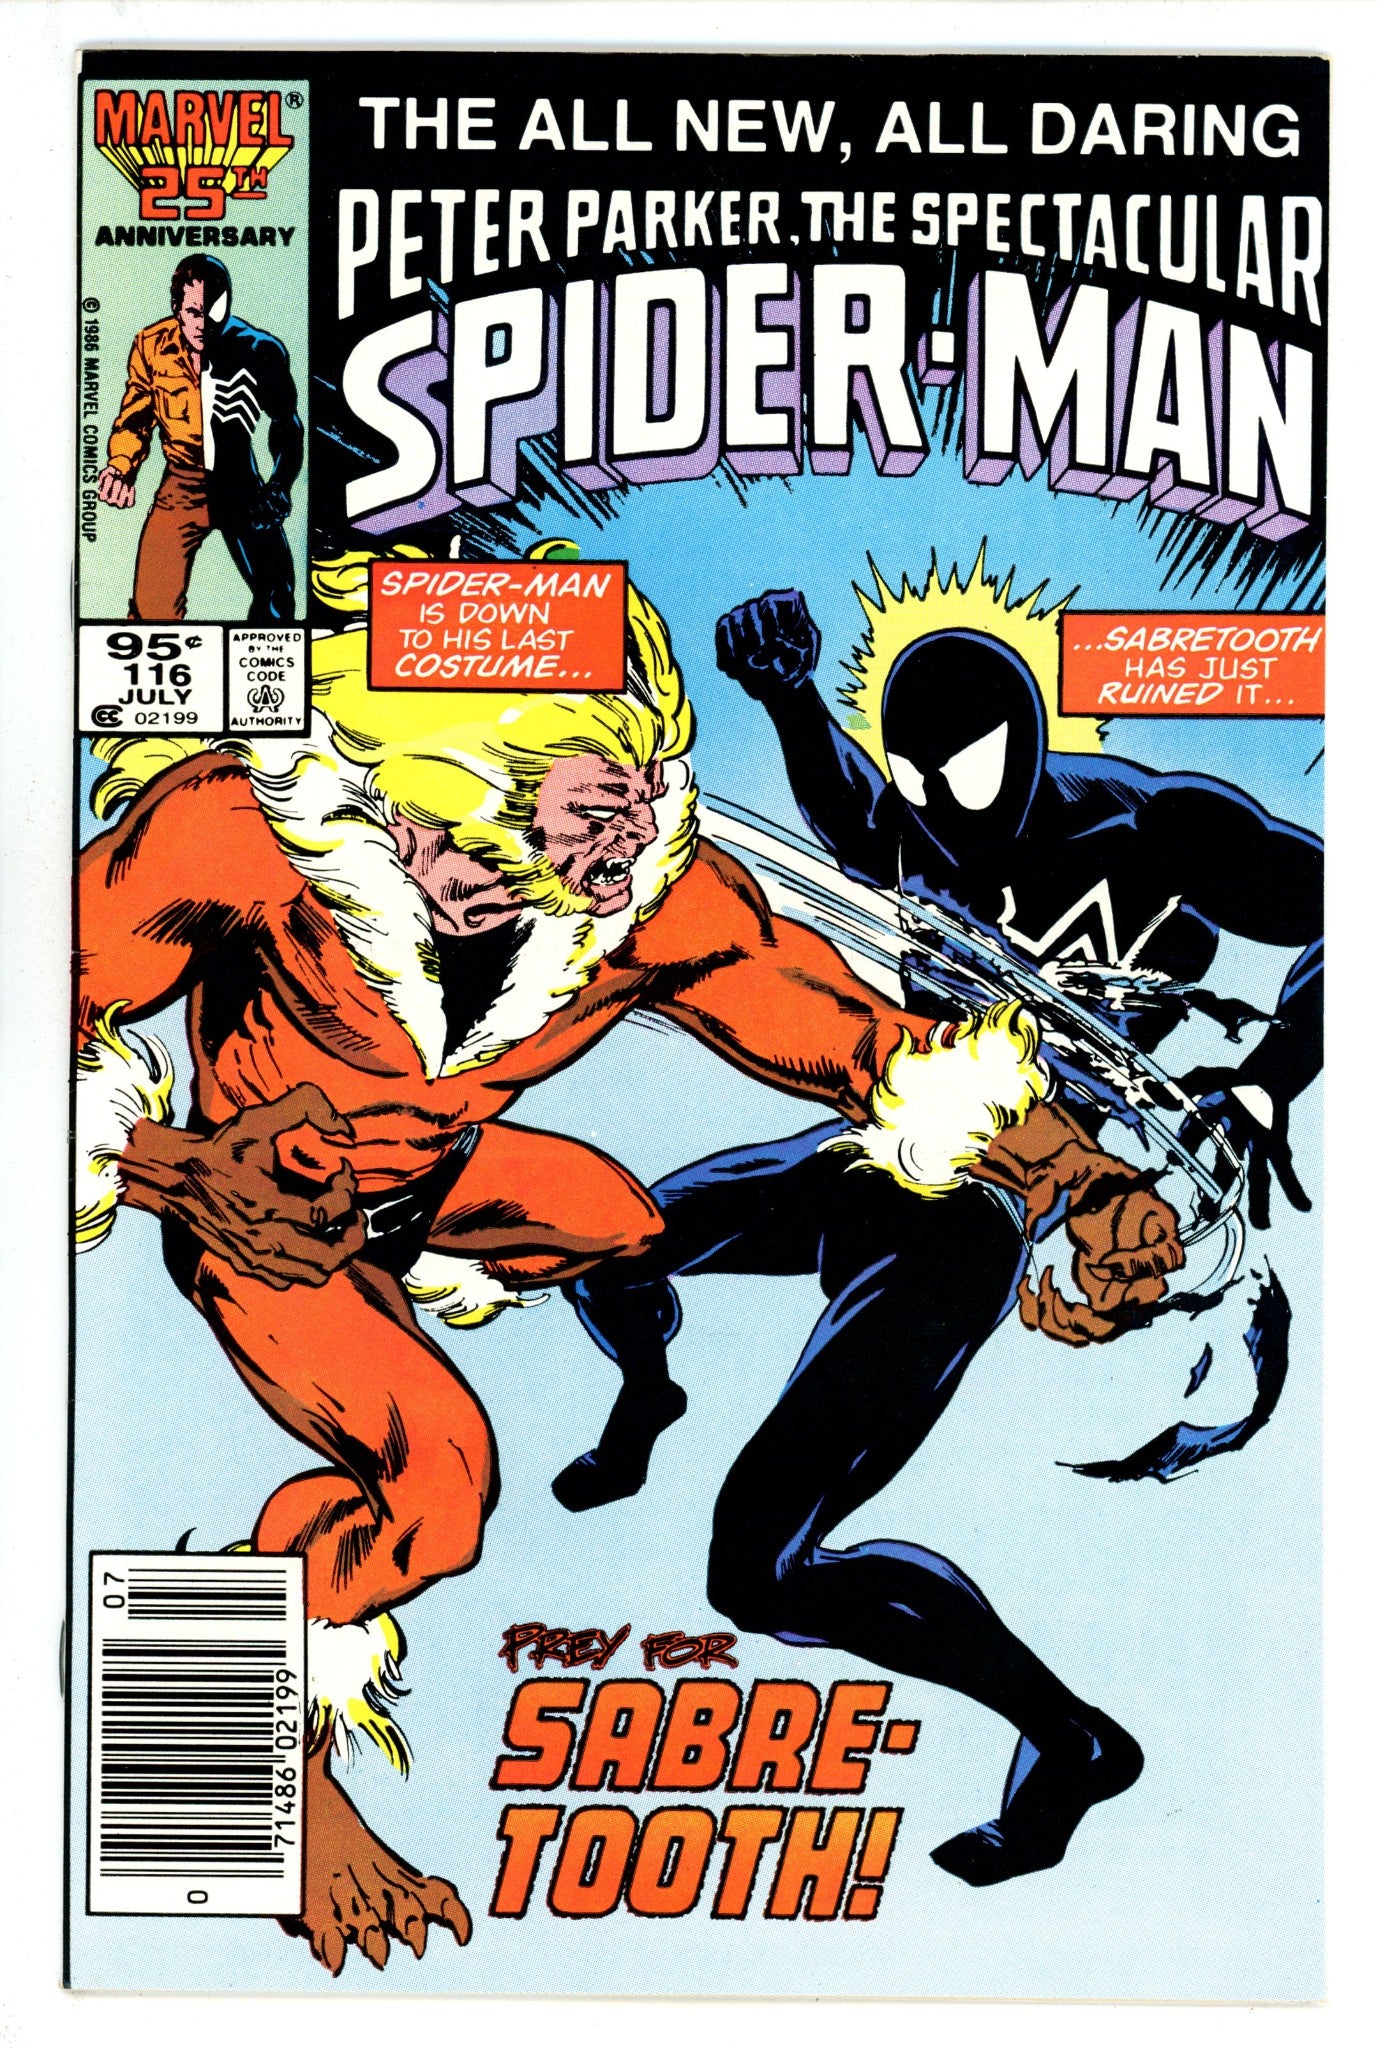 The Spectacular Spider-Man Vol 1 116 VF+ (8.5) (1986) Canadian Price Variant 